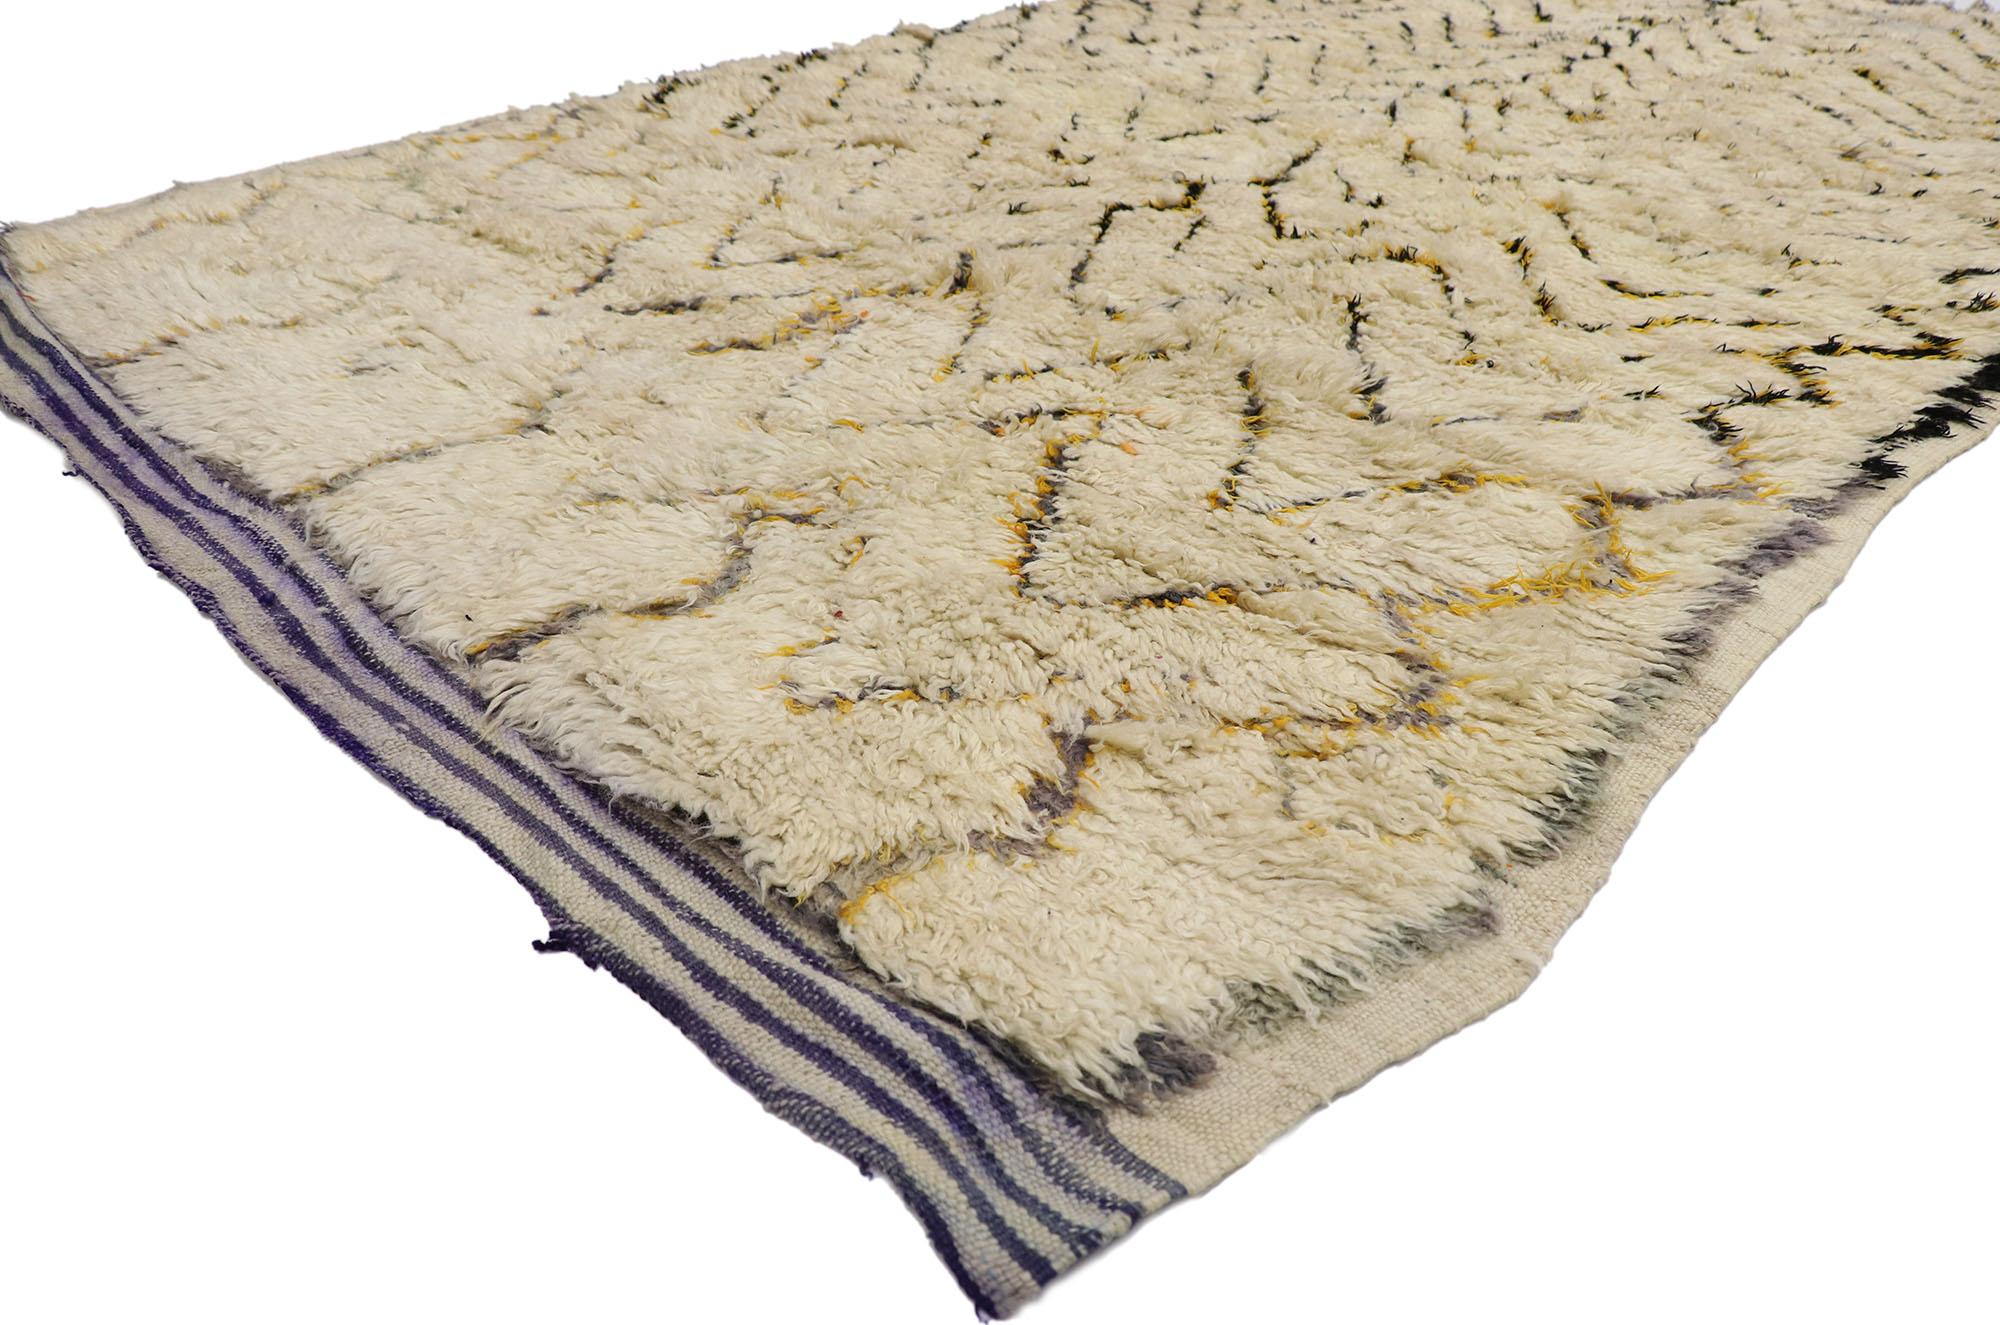 21351 Vintage Berber Moroccan Azilal rug with Mid-Century Modern Style 05'03 x 09'00. With its simplicity, plush pile and Mid-Century Modern style, this hand knotted wool vintage Berber Moroccan Azilal rug is a captivating vision of woven beauty. It